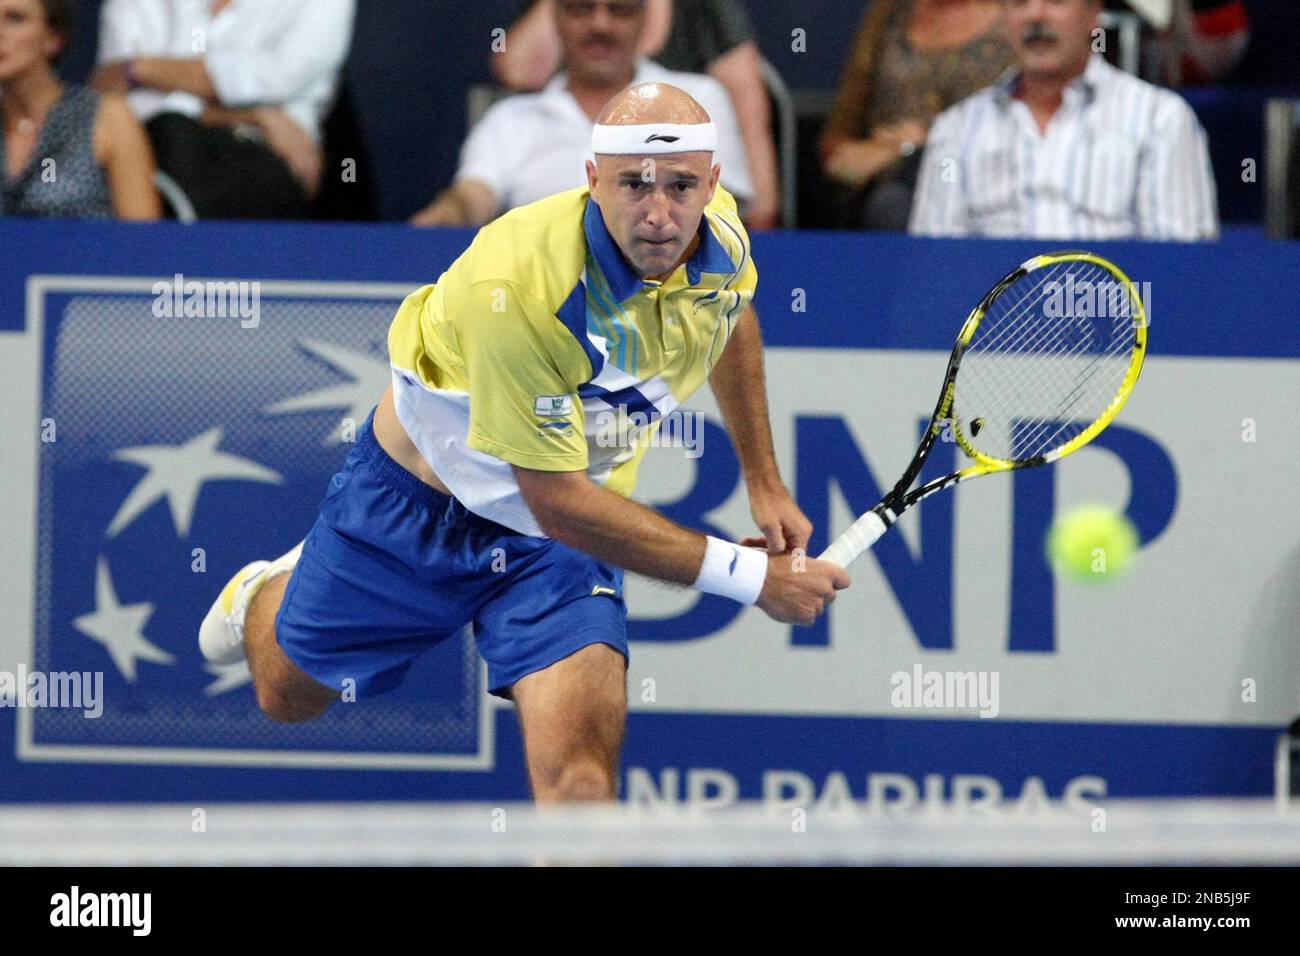 Ivan Ljubicic of Croatia returns a ball to Jo Wilfried Tsonga of France during their final match of the ATP Open de Moselle tournament in Metz, eastern France, Sunday, Sept